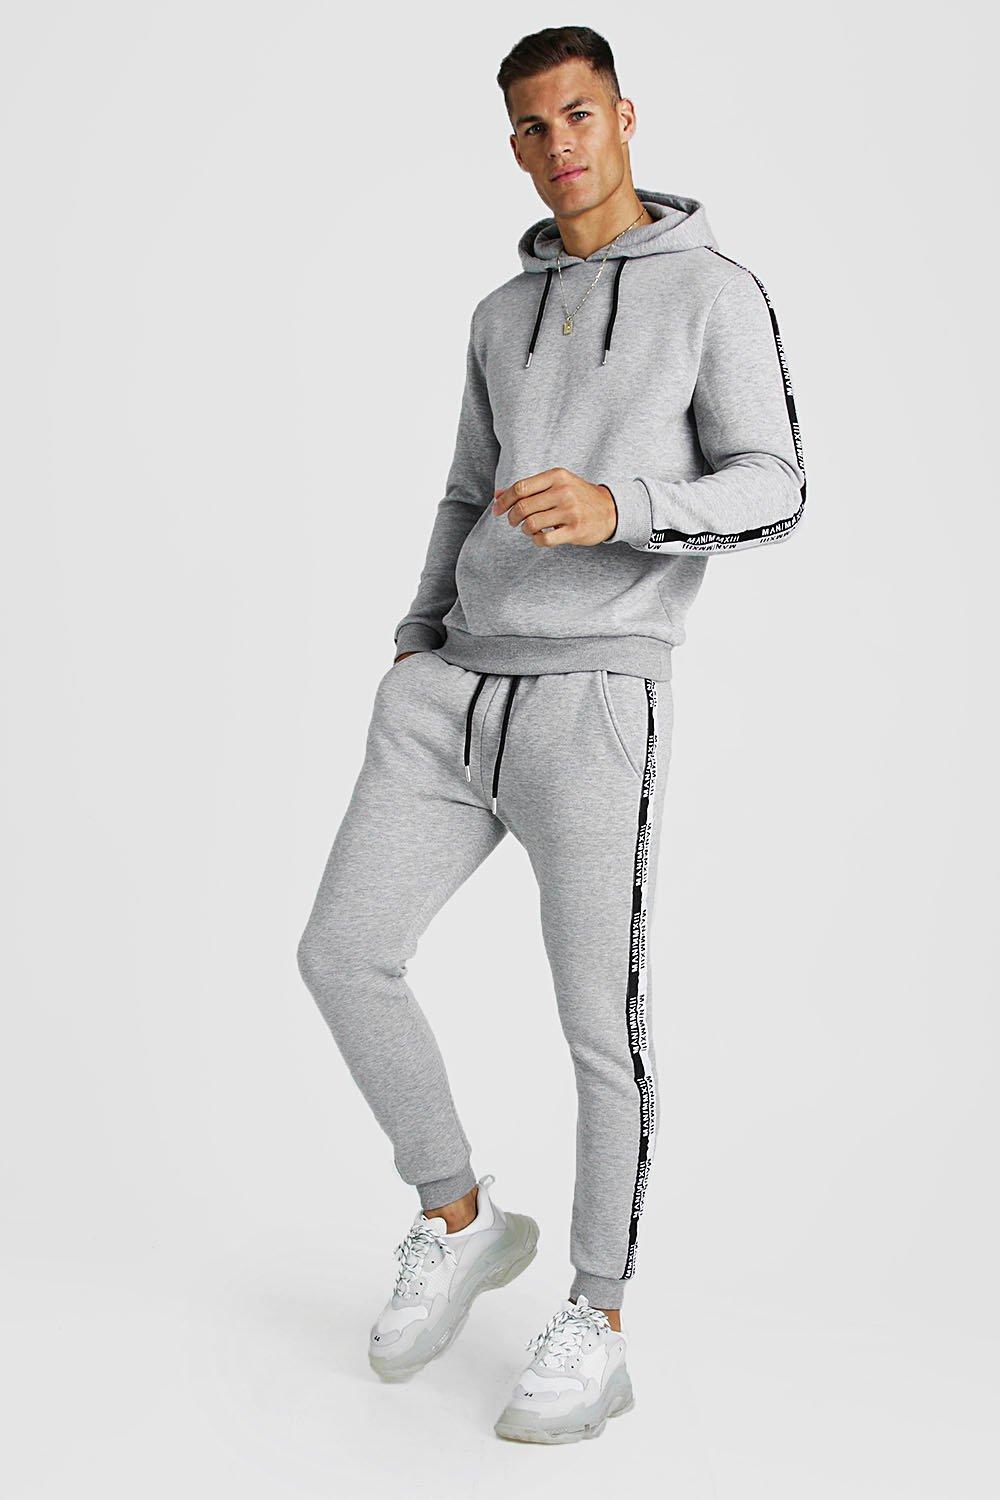 grey tracksuits